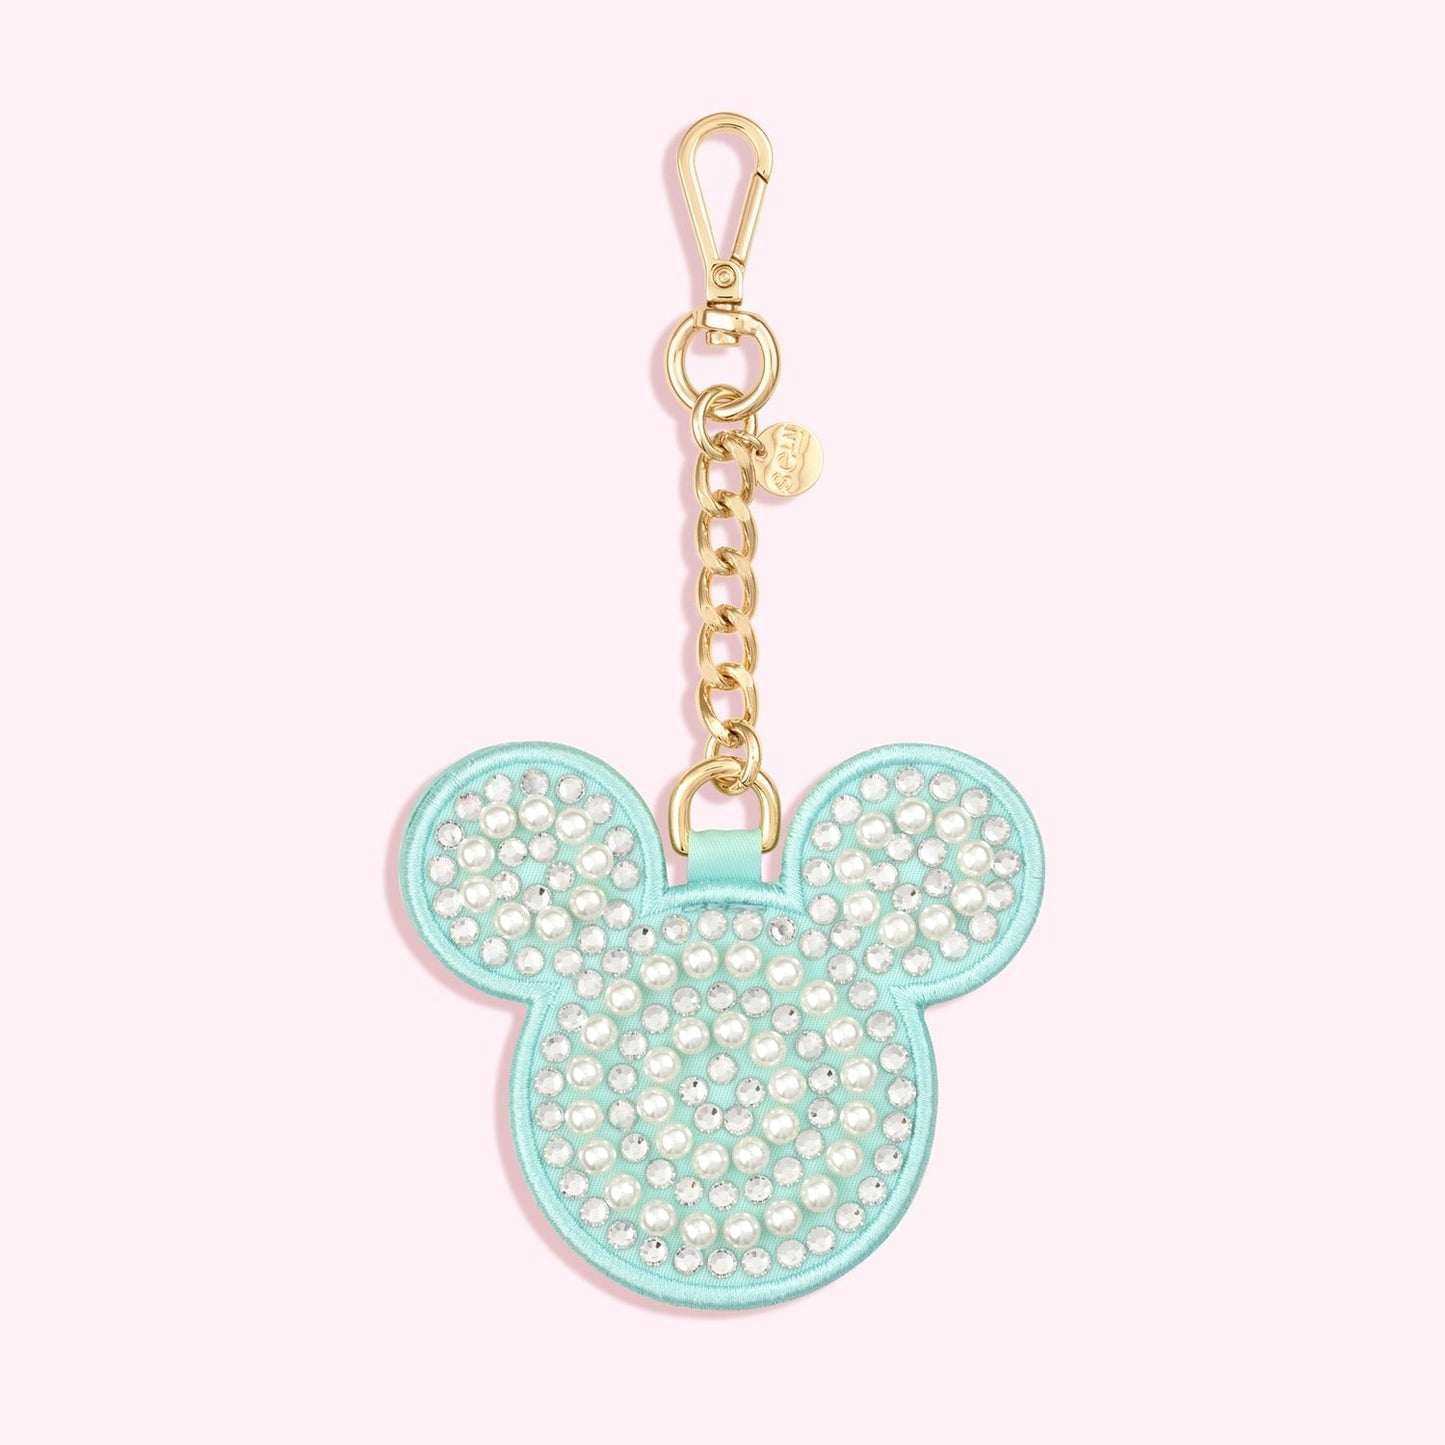 Cotton Candy Disney Mickey Mouse Bag Charm